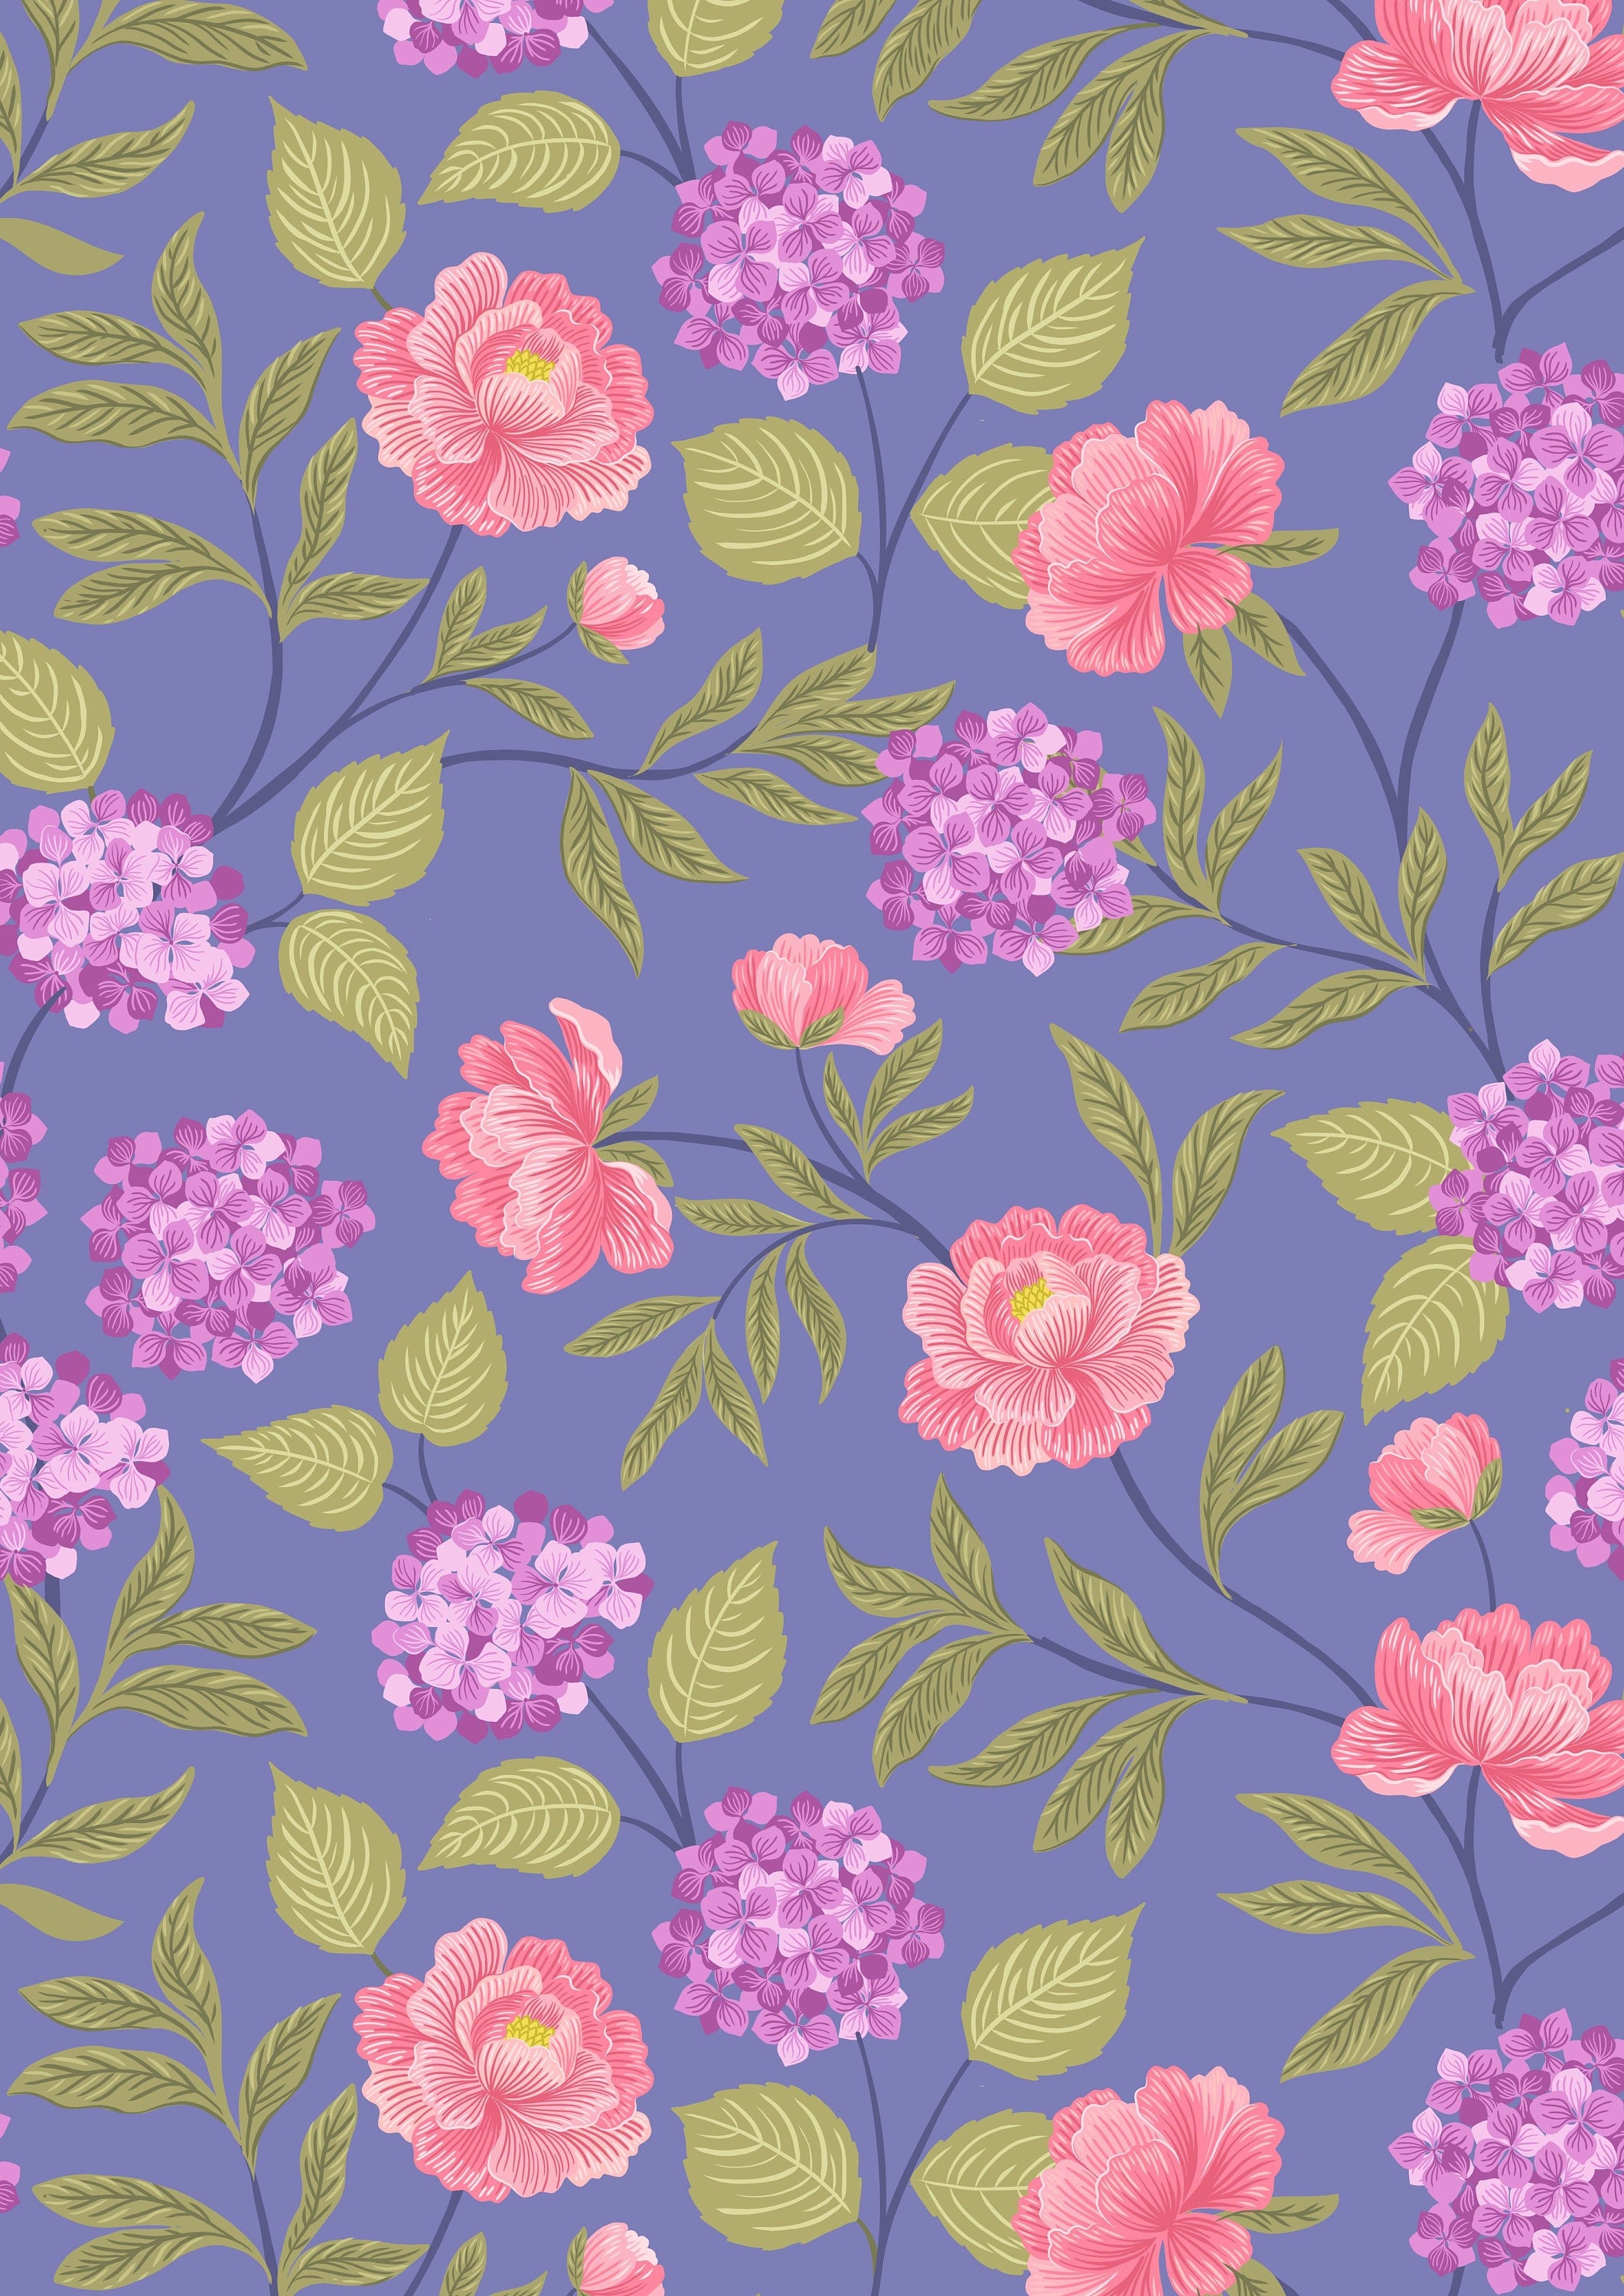 Floral Blue Peony's cotton fabric - Love Blooms by Lewis & Irene